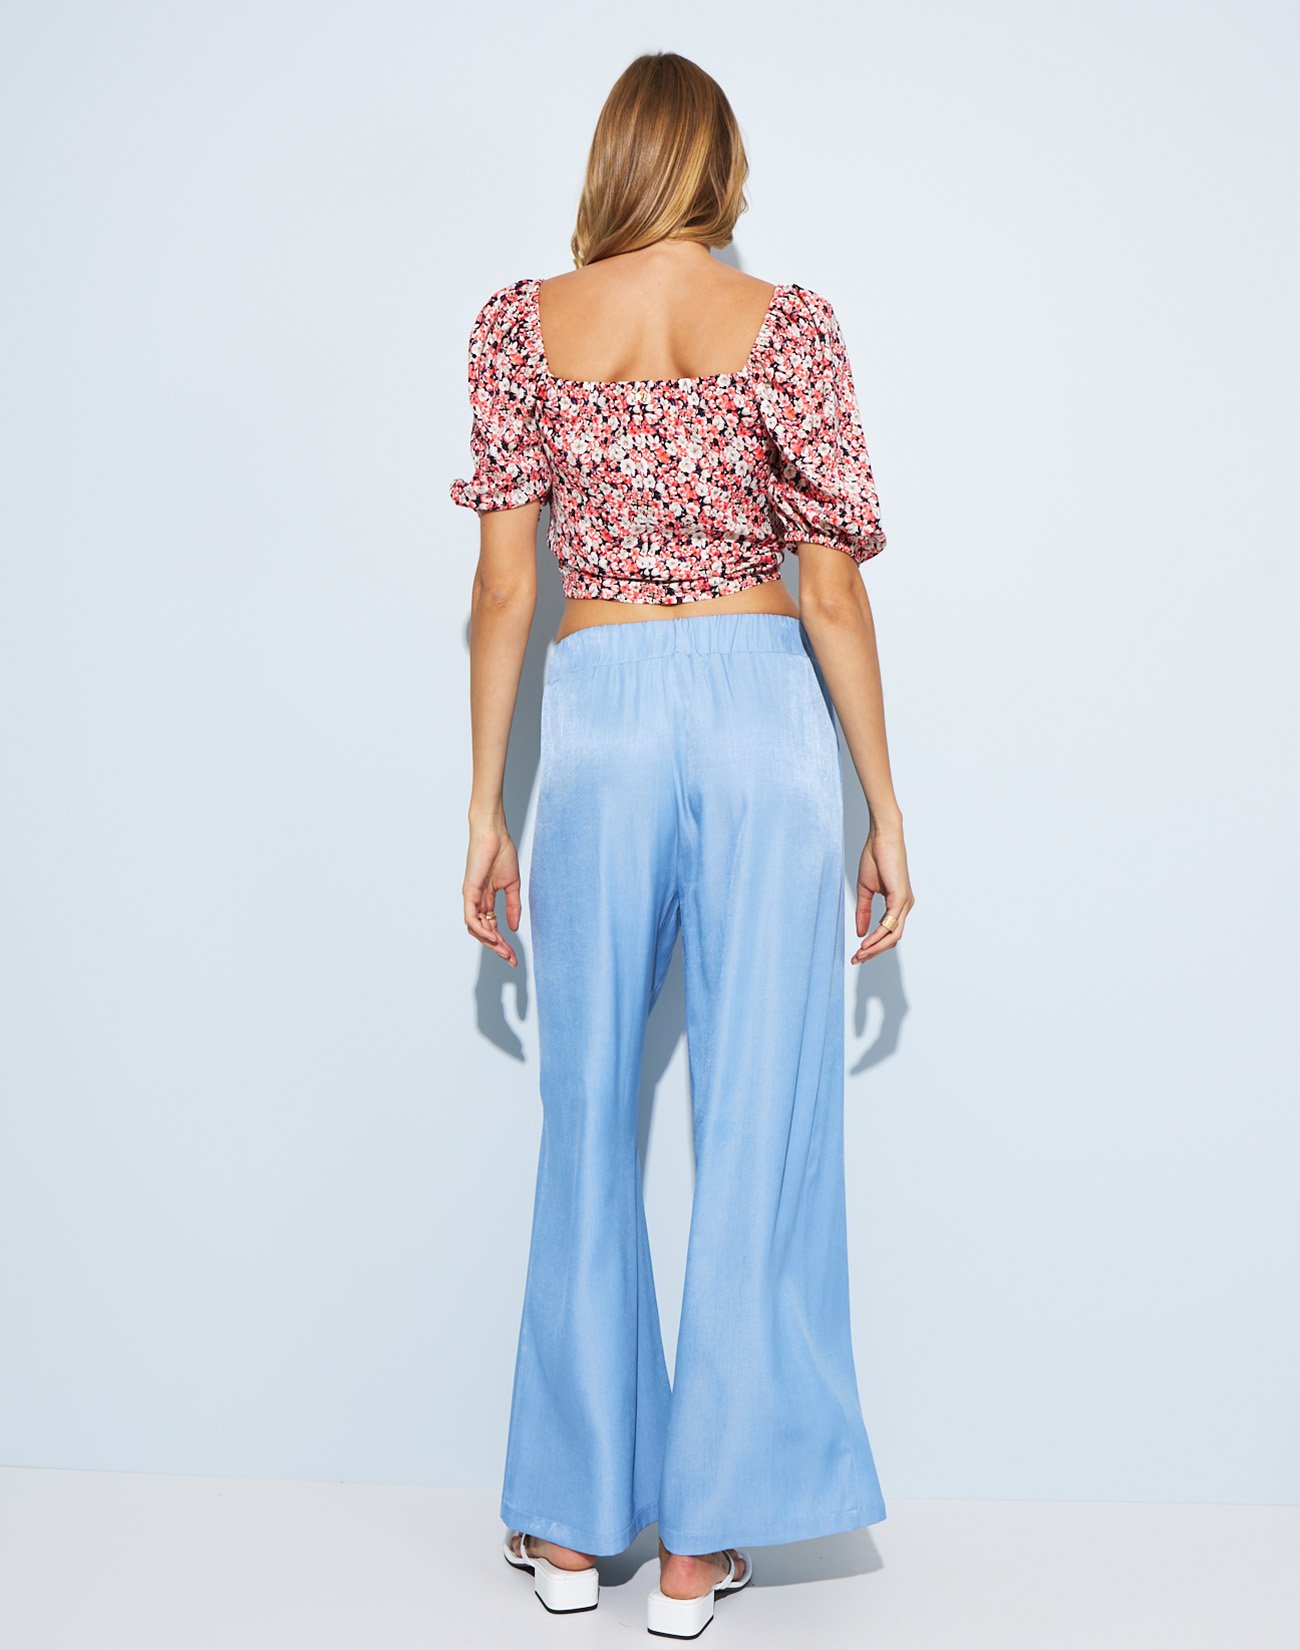 Printed cropped top with tie